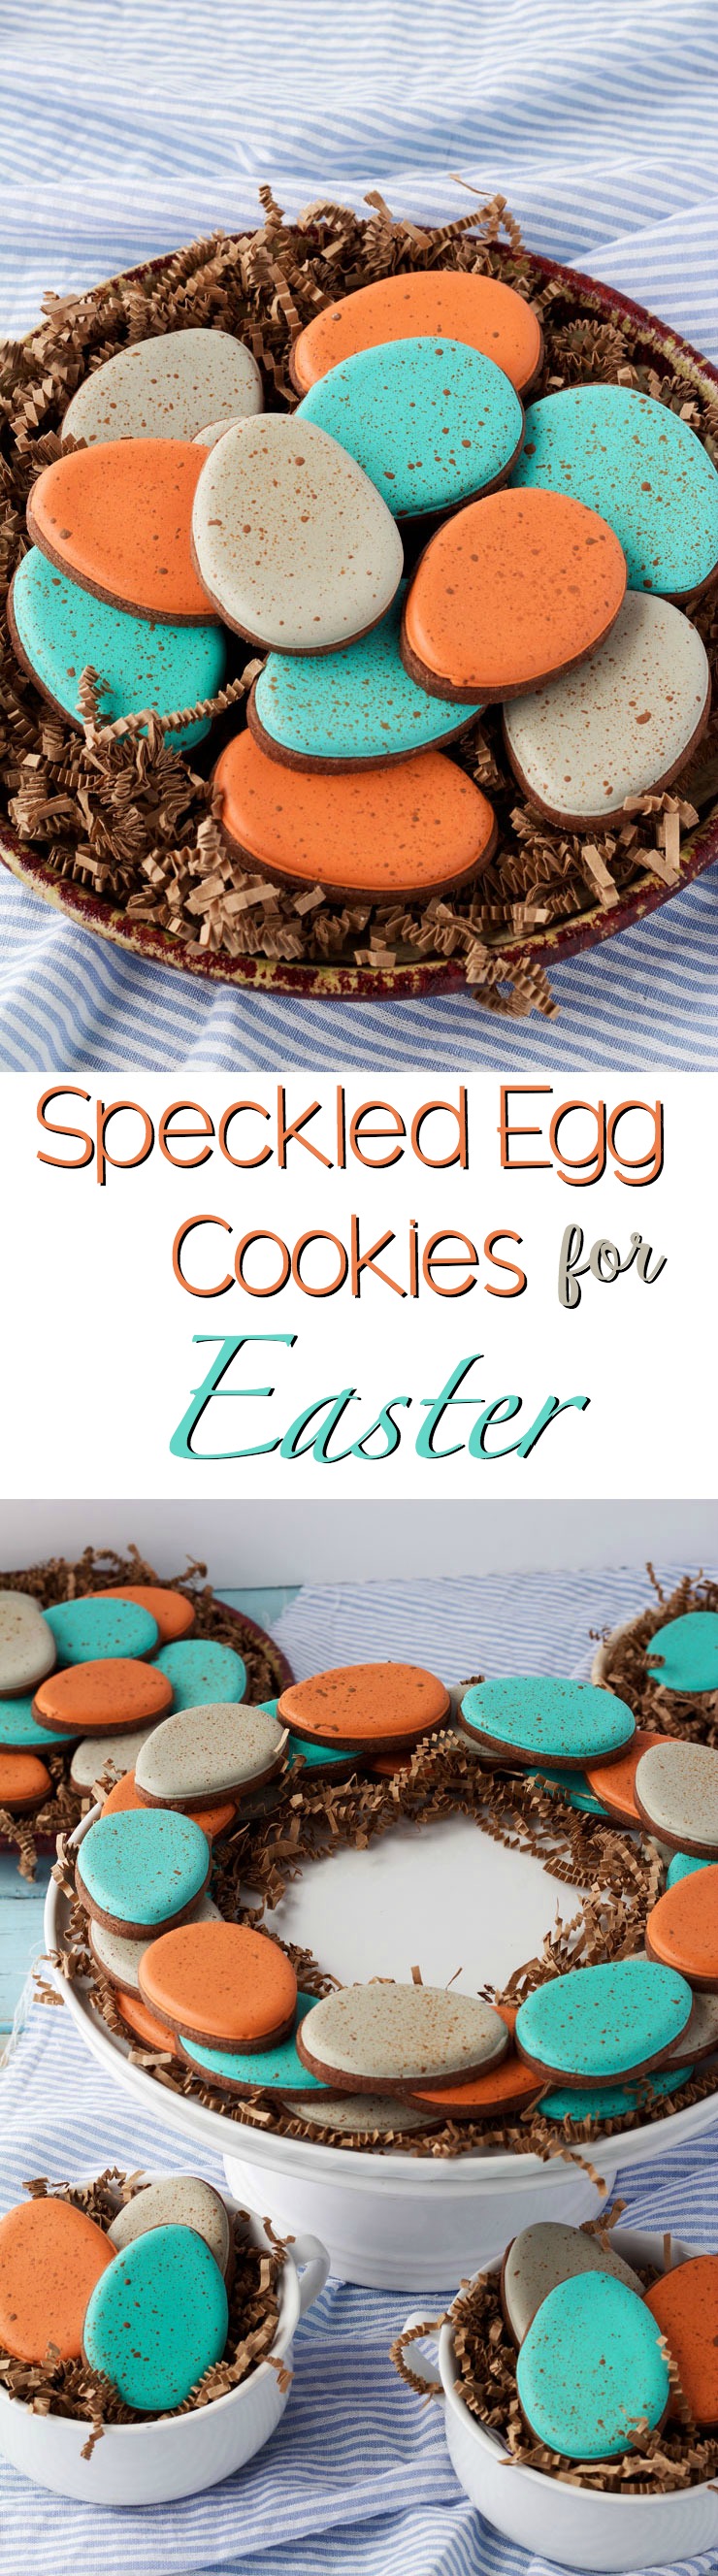 Speckled Egg Cookies for Easter www.thebearfootbaker.com